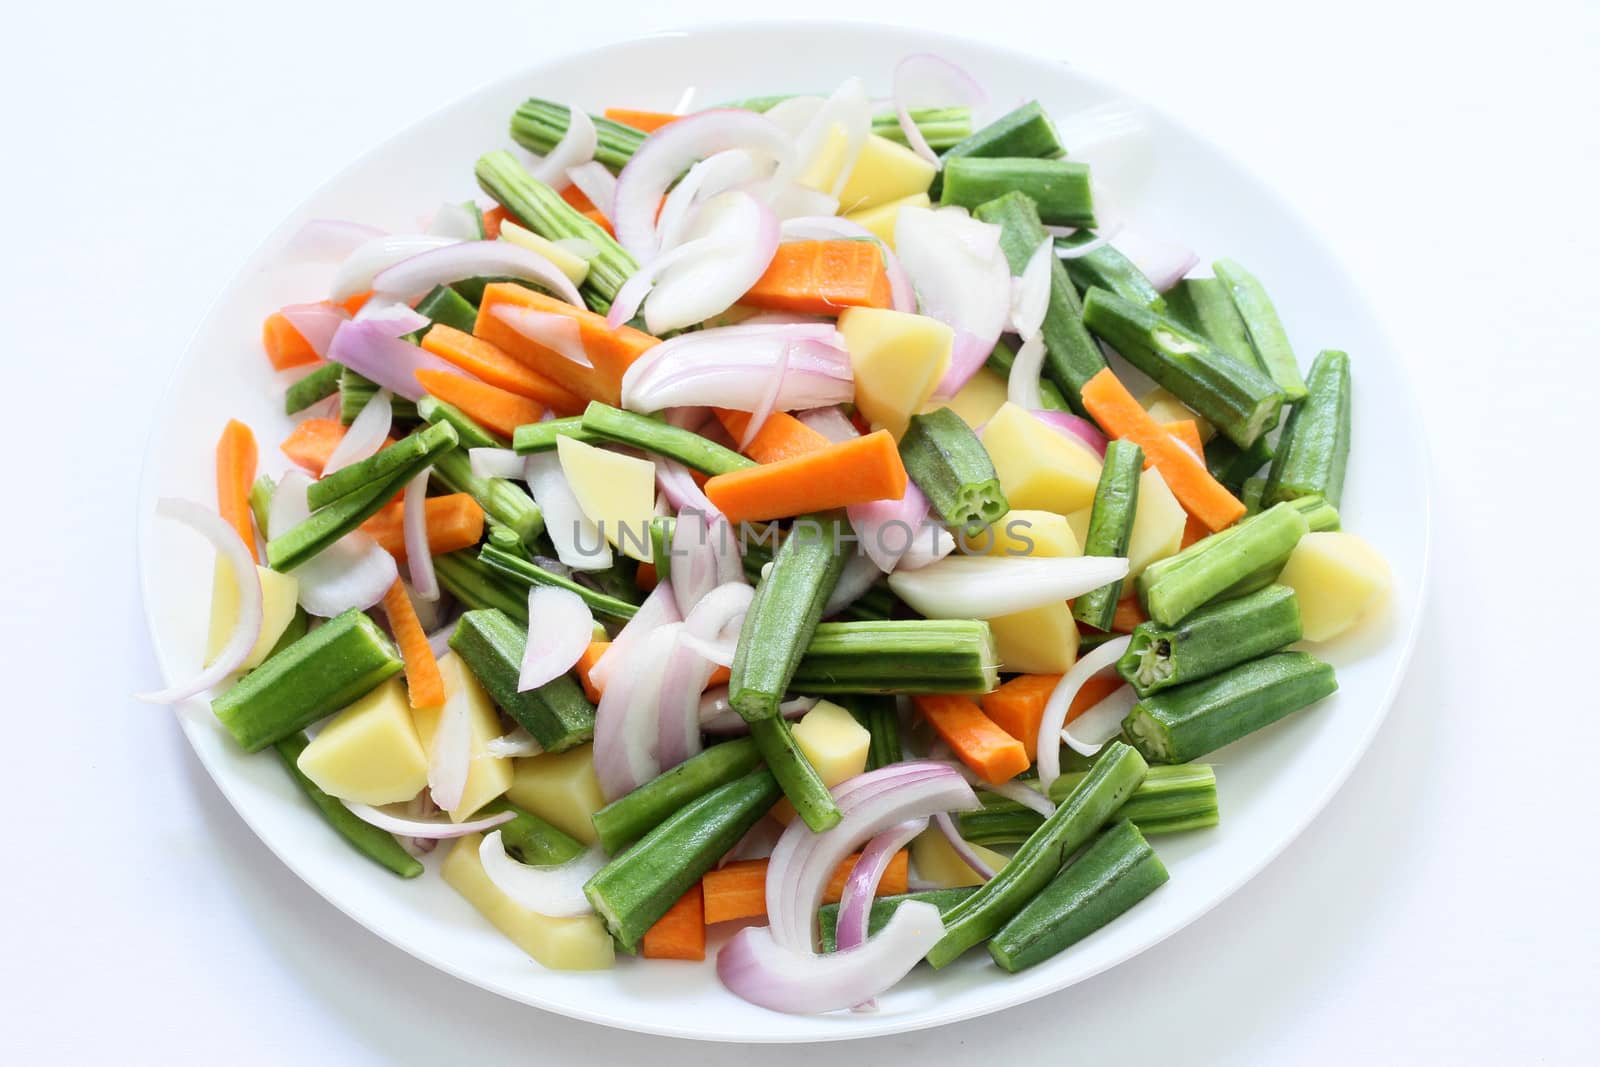 Fresh mixed vegetables chopped and placed in a plate with white background